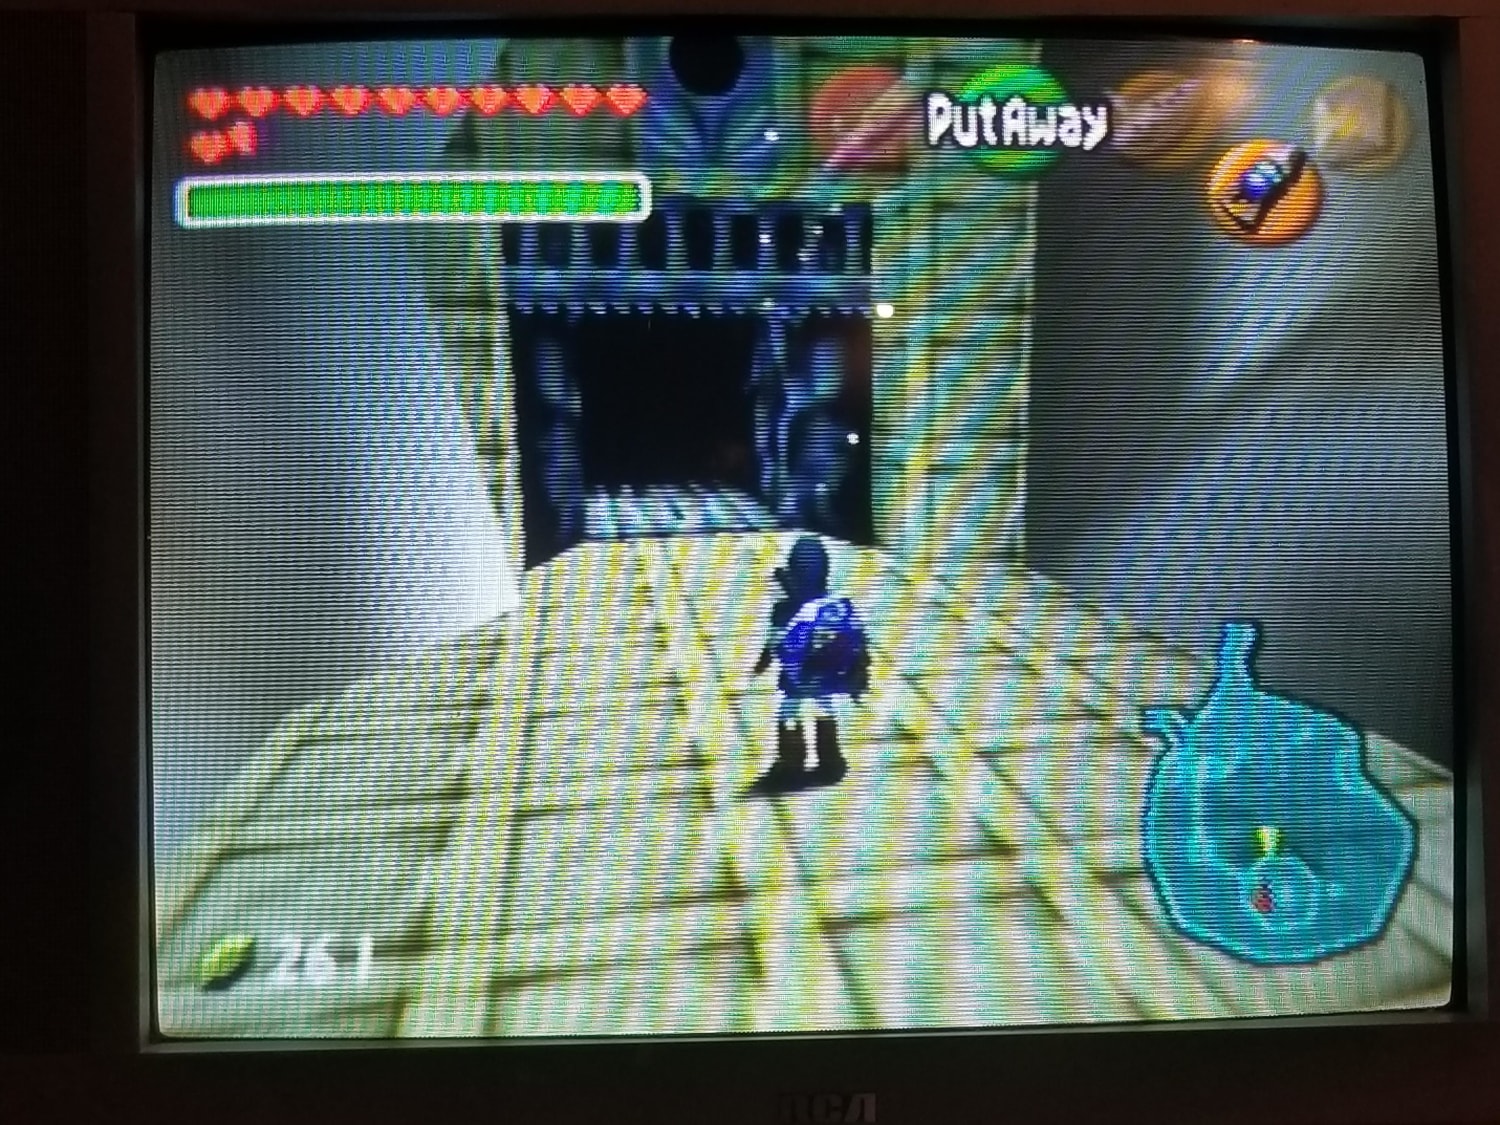 About to start this monster of a dungeon on the Master Quest.